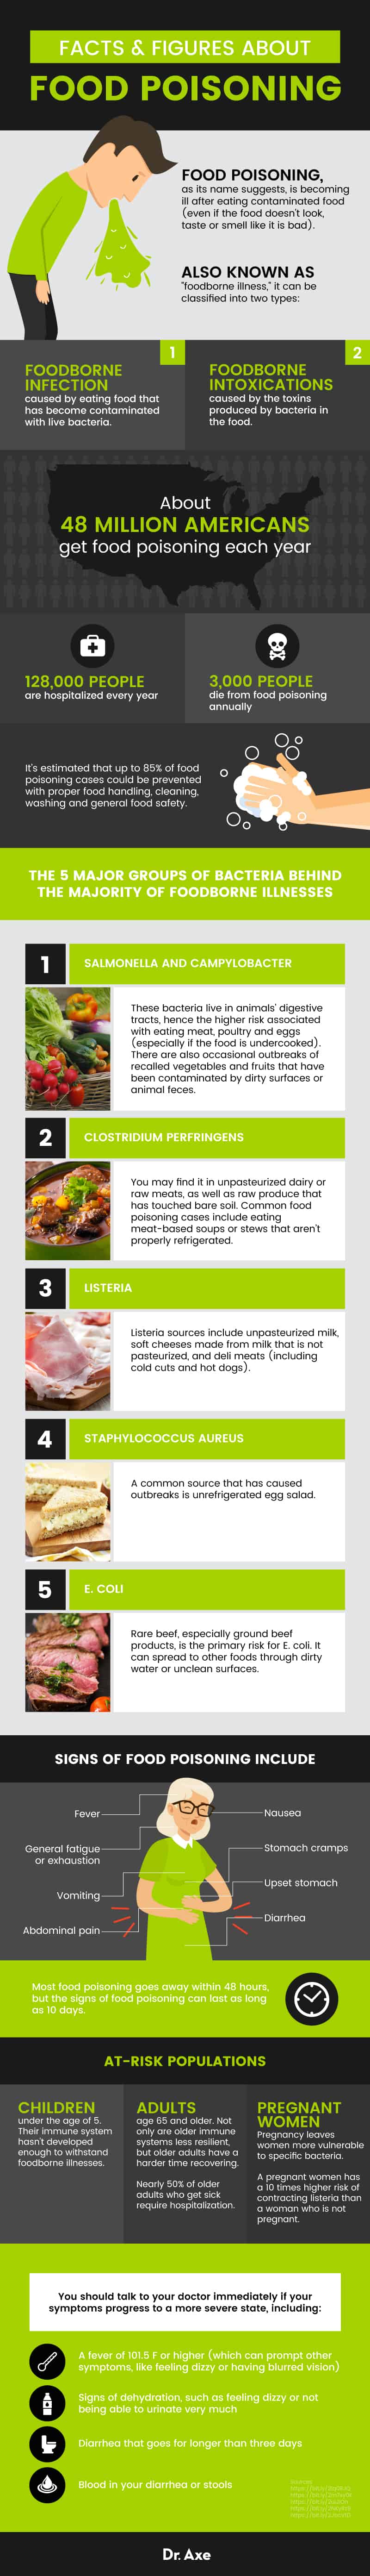 Signs of food poisoning - Dr. Axe